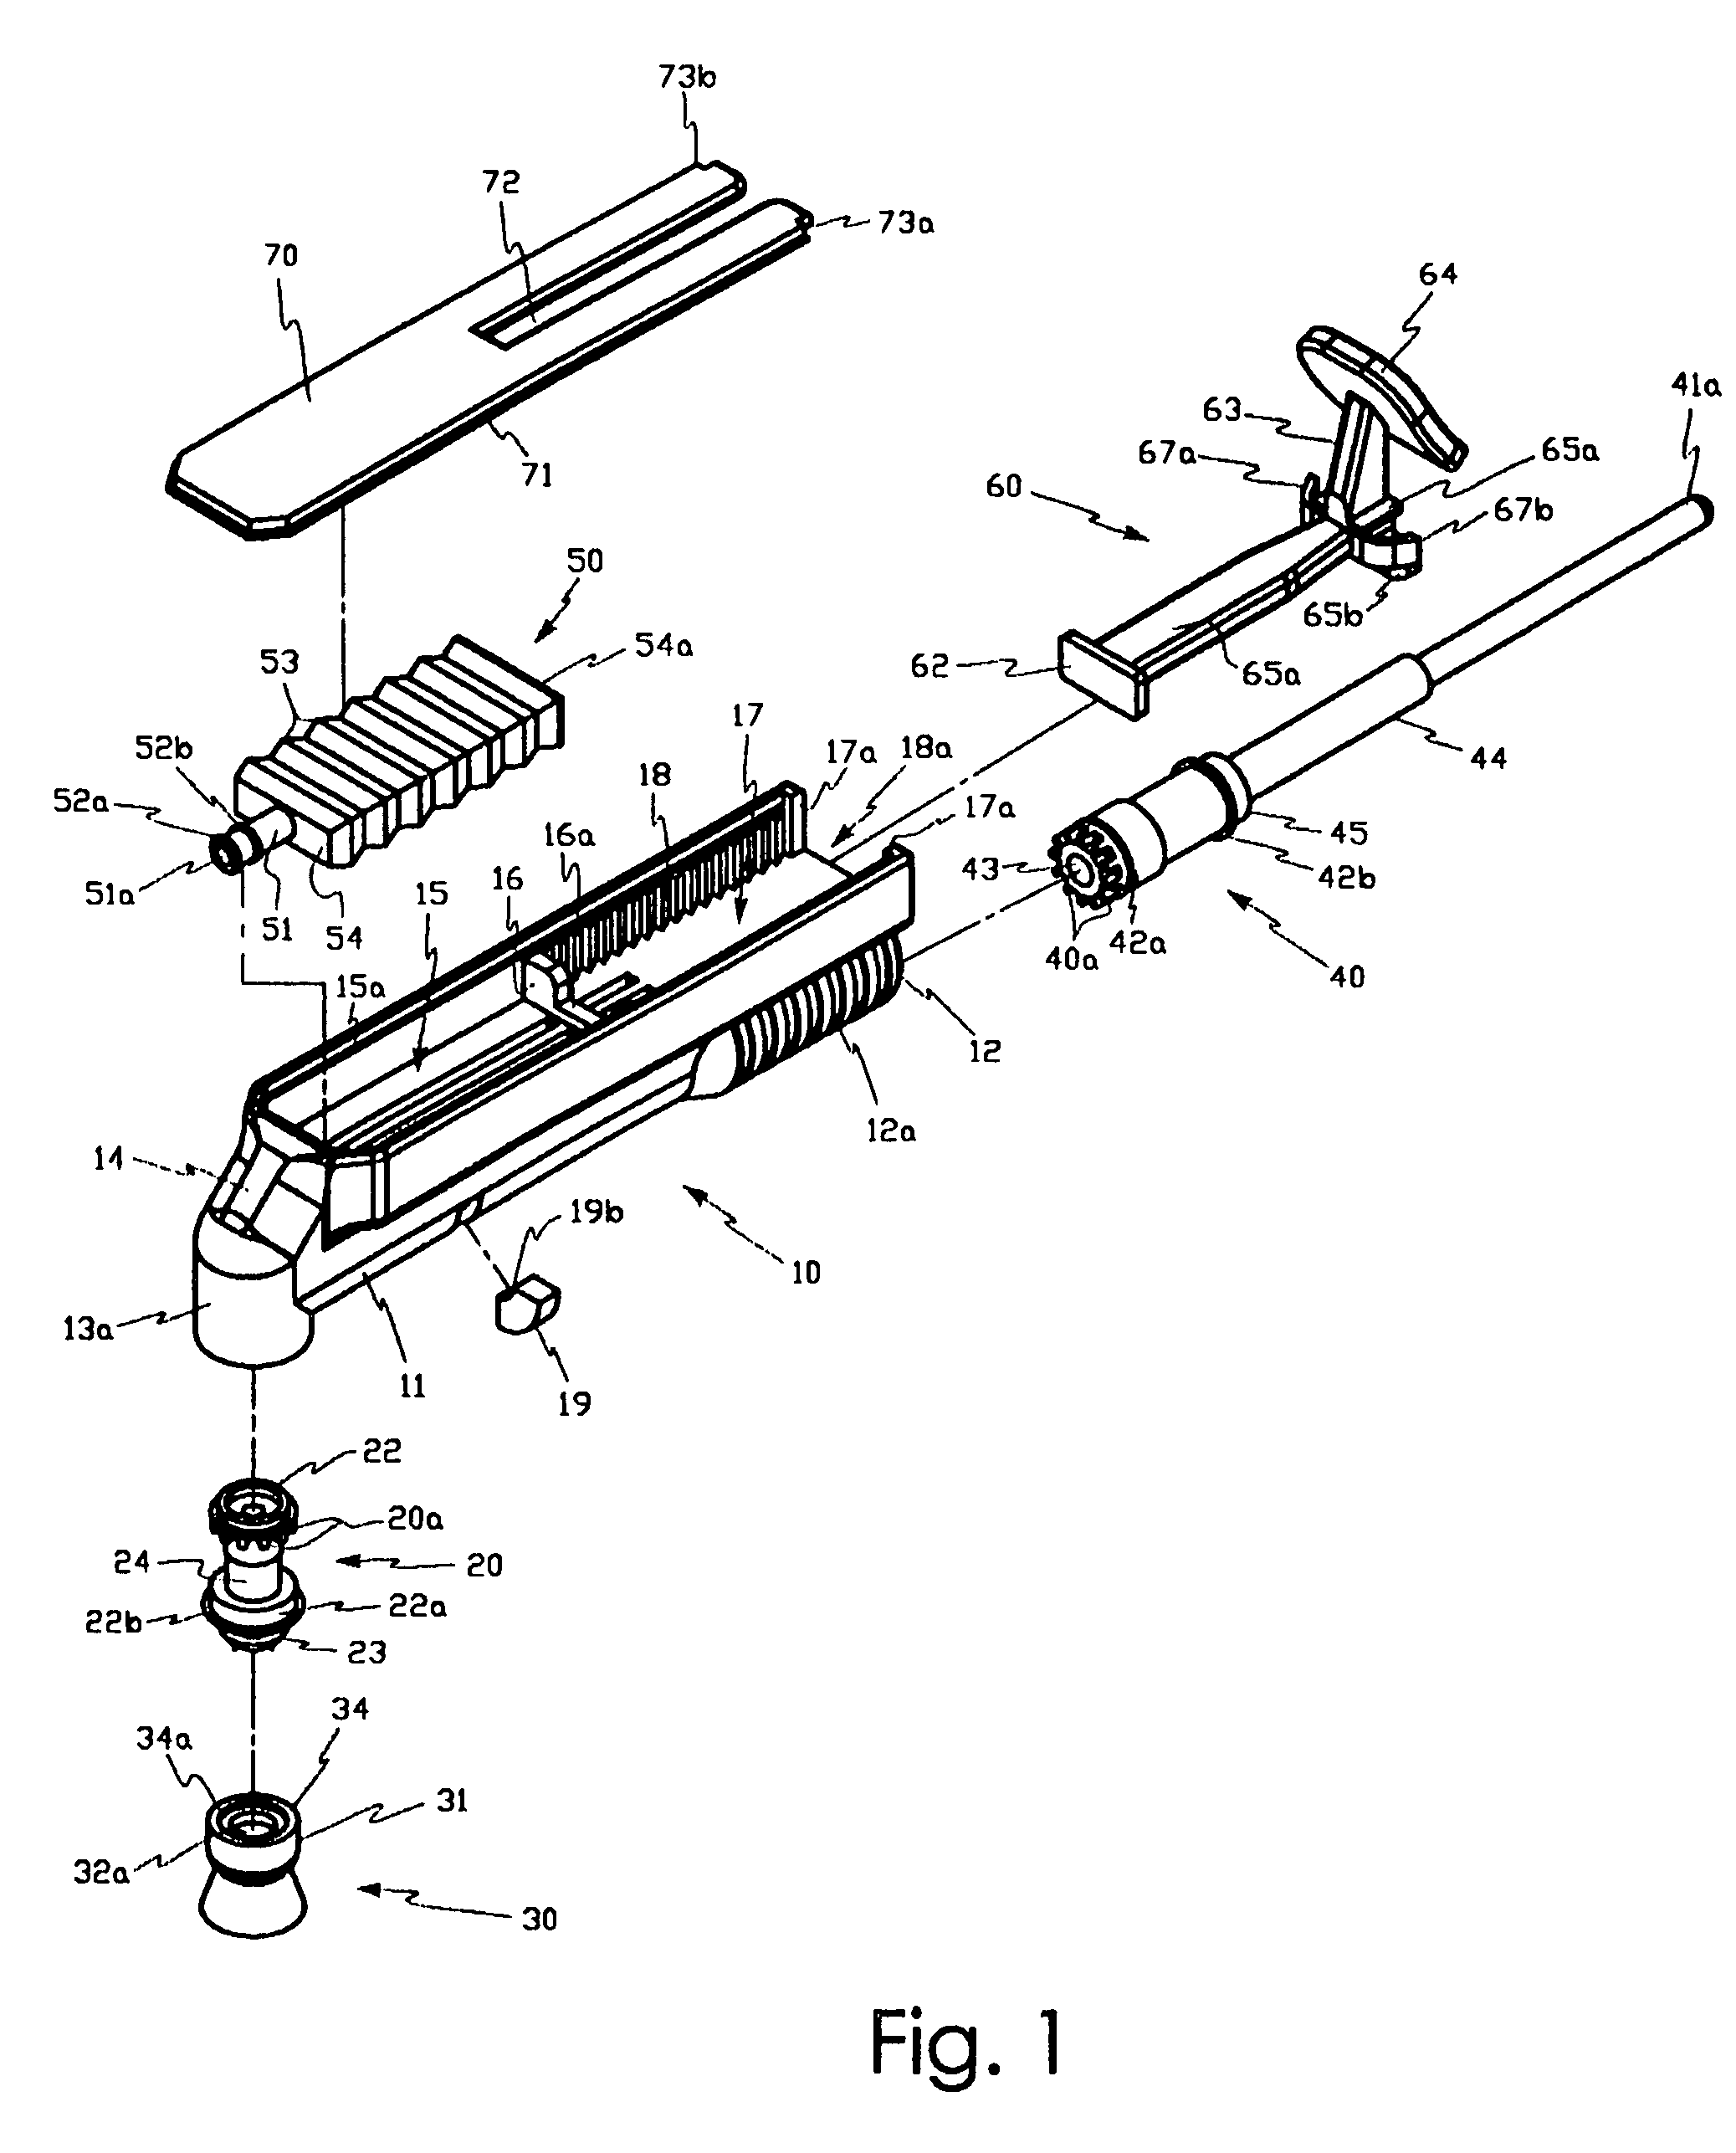 Disposable dental prophylaxis apparatus capable of discharging predetermined amount of dentifrice material therefrom